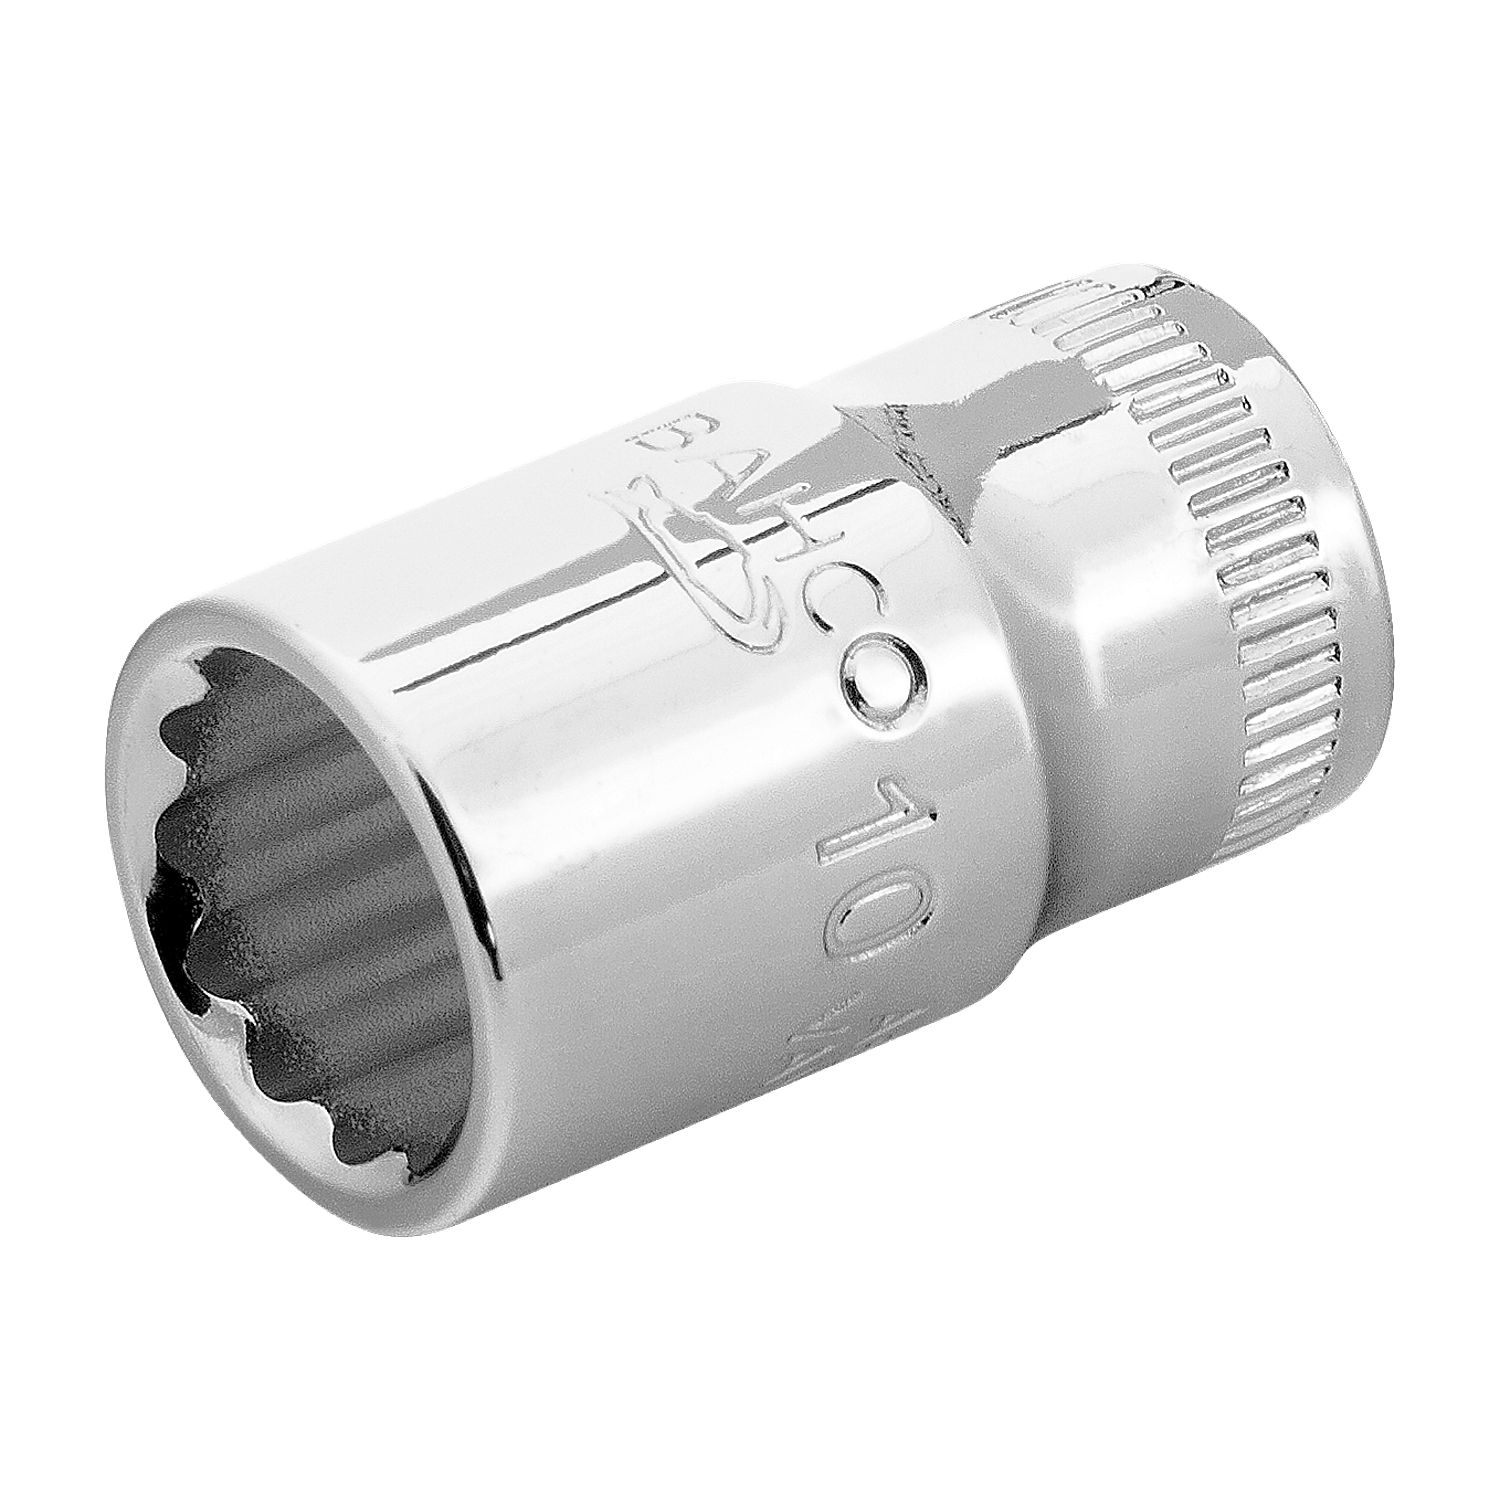 BAHCO A6700DM 1/4" Square Drive Socket With Metric Bi-Hex Profile - Premium Socket from BAHCO - Shop now at Yew Aik.